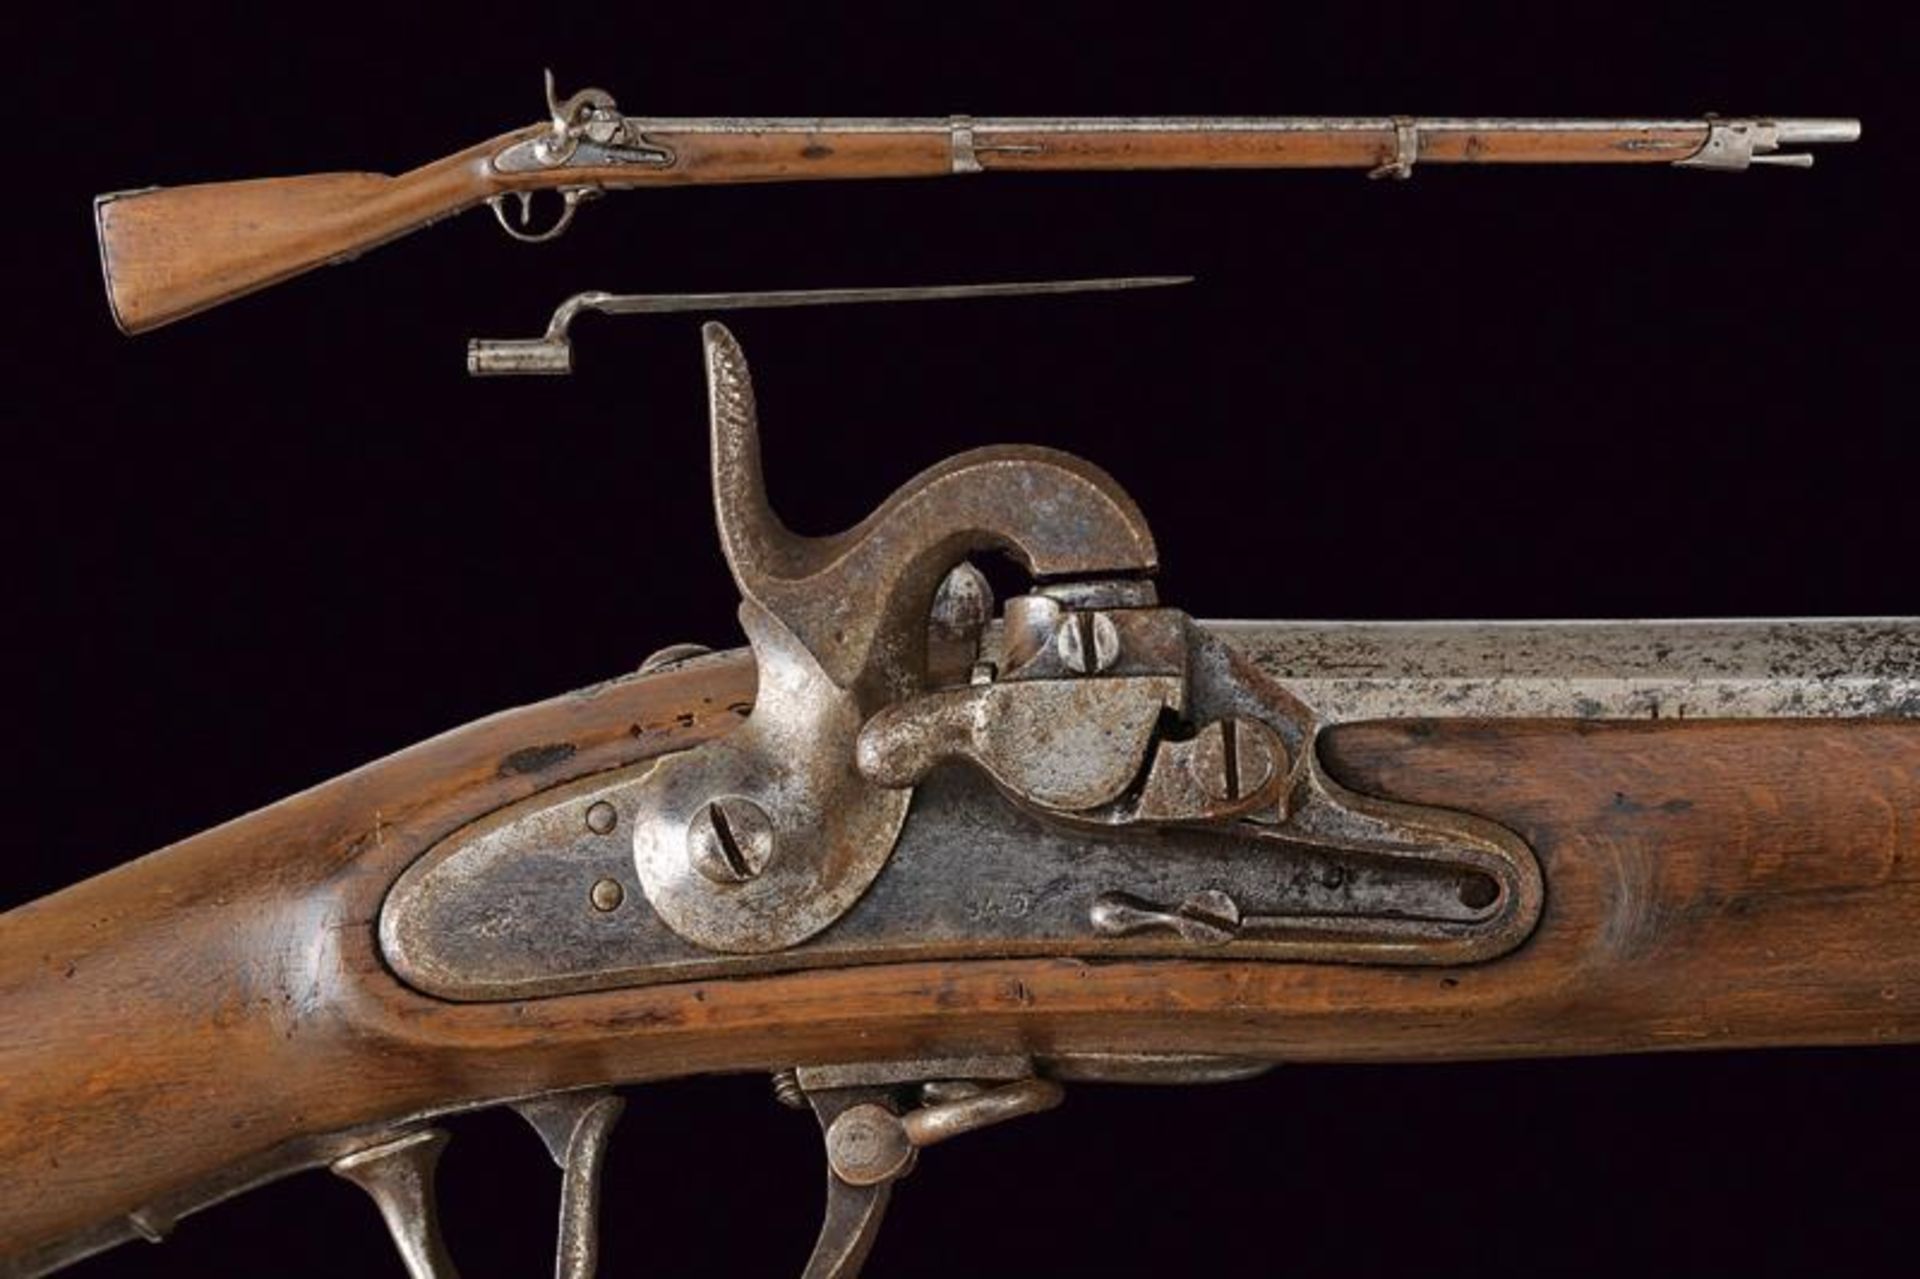 An infantry 1842 model Augustin musket with bayonet